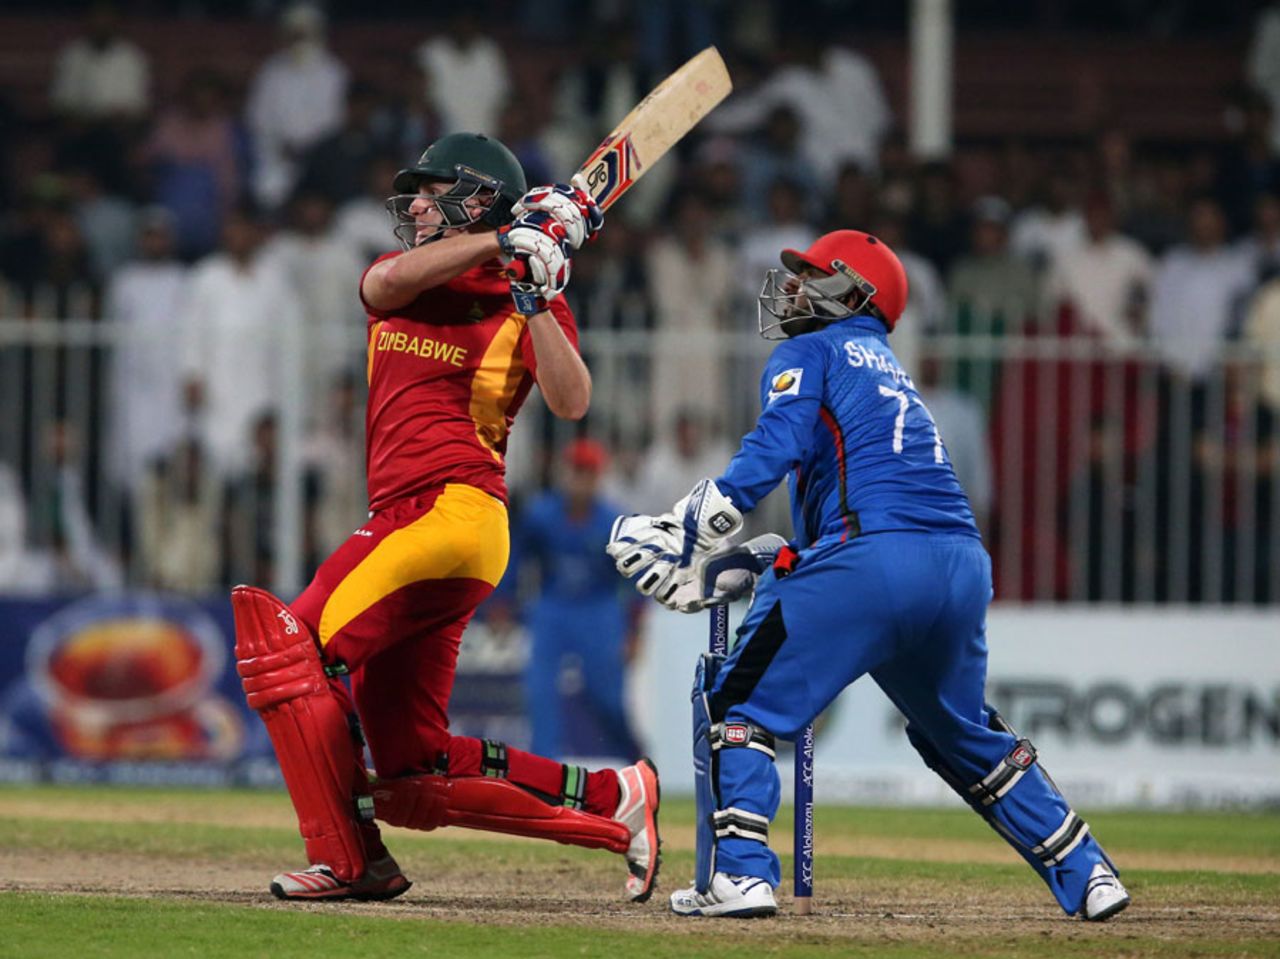 Peter Moor employs the pull, Afghanistan v Zimbabwe, 2nd T20I, Sharjah, January 10, 2016